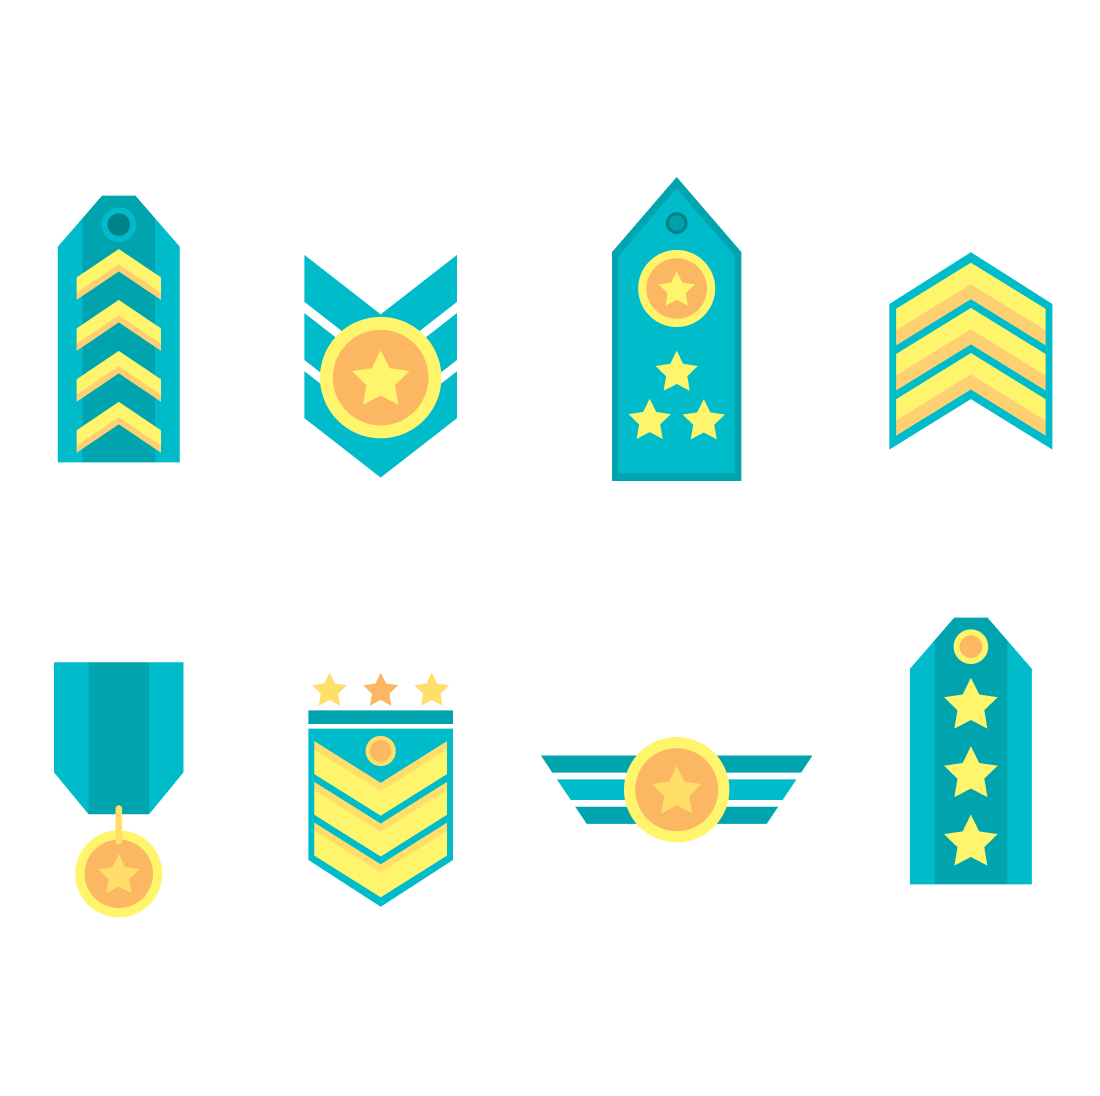 Awards for the Air Force in blue and yellow.